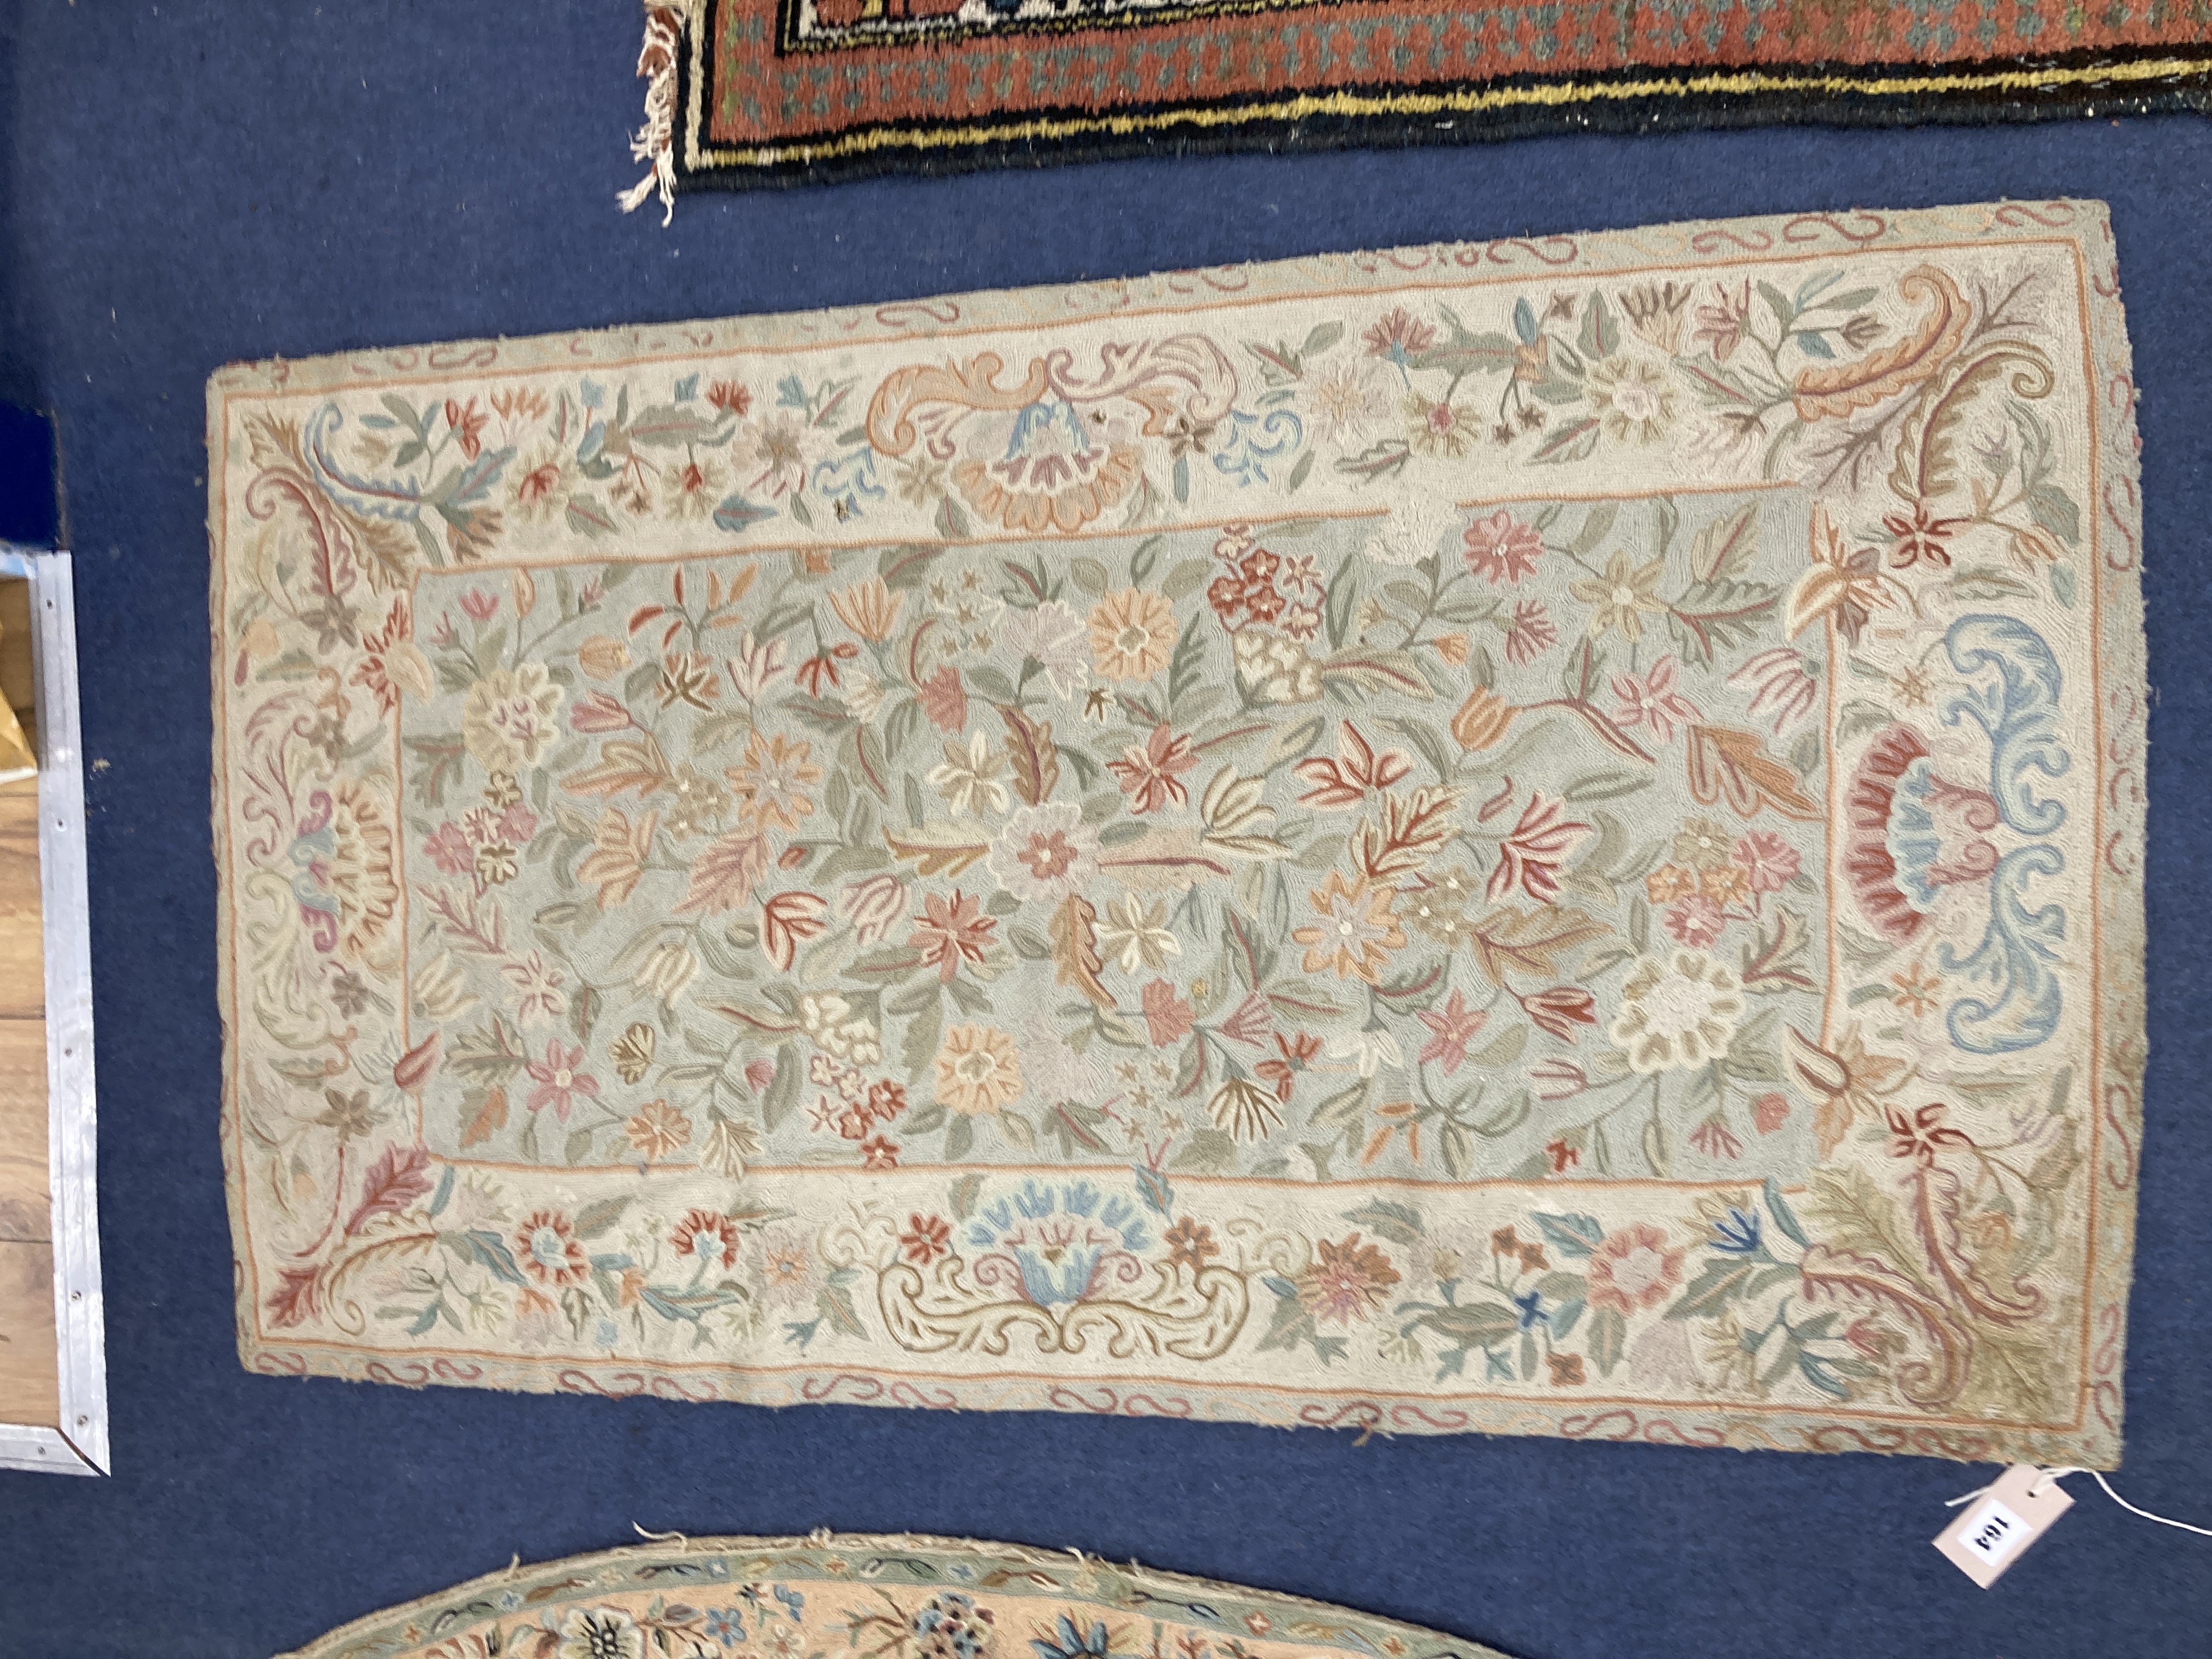 An Antique chainstitch rug, with central field of flowers on a pale blue ground, 122 x 70cm